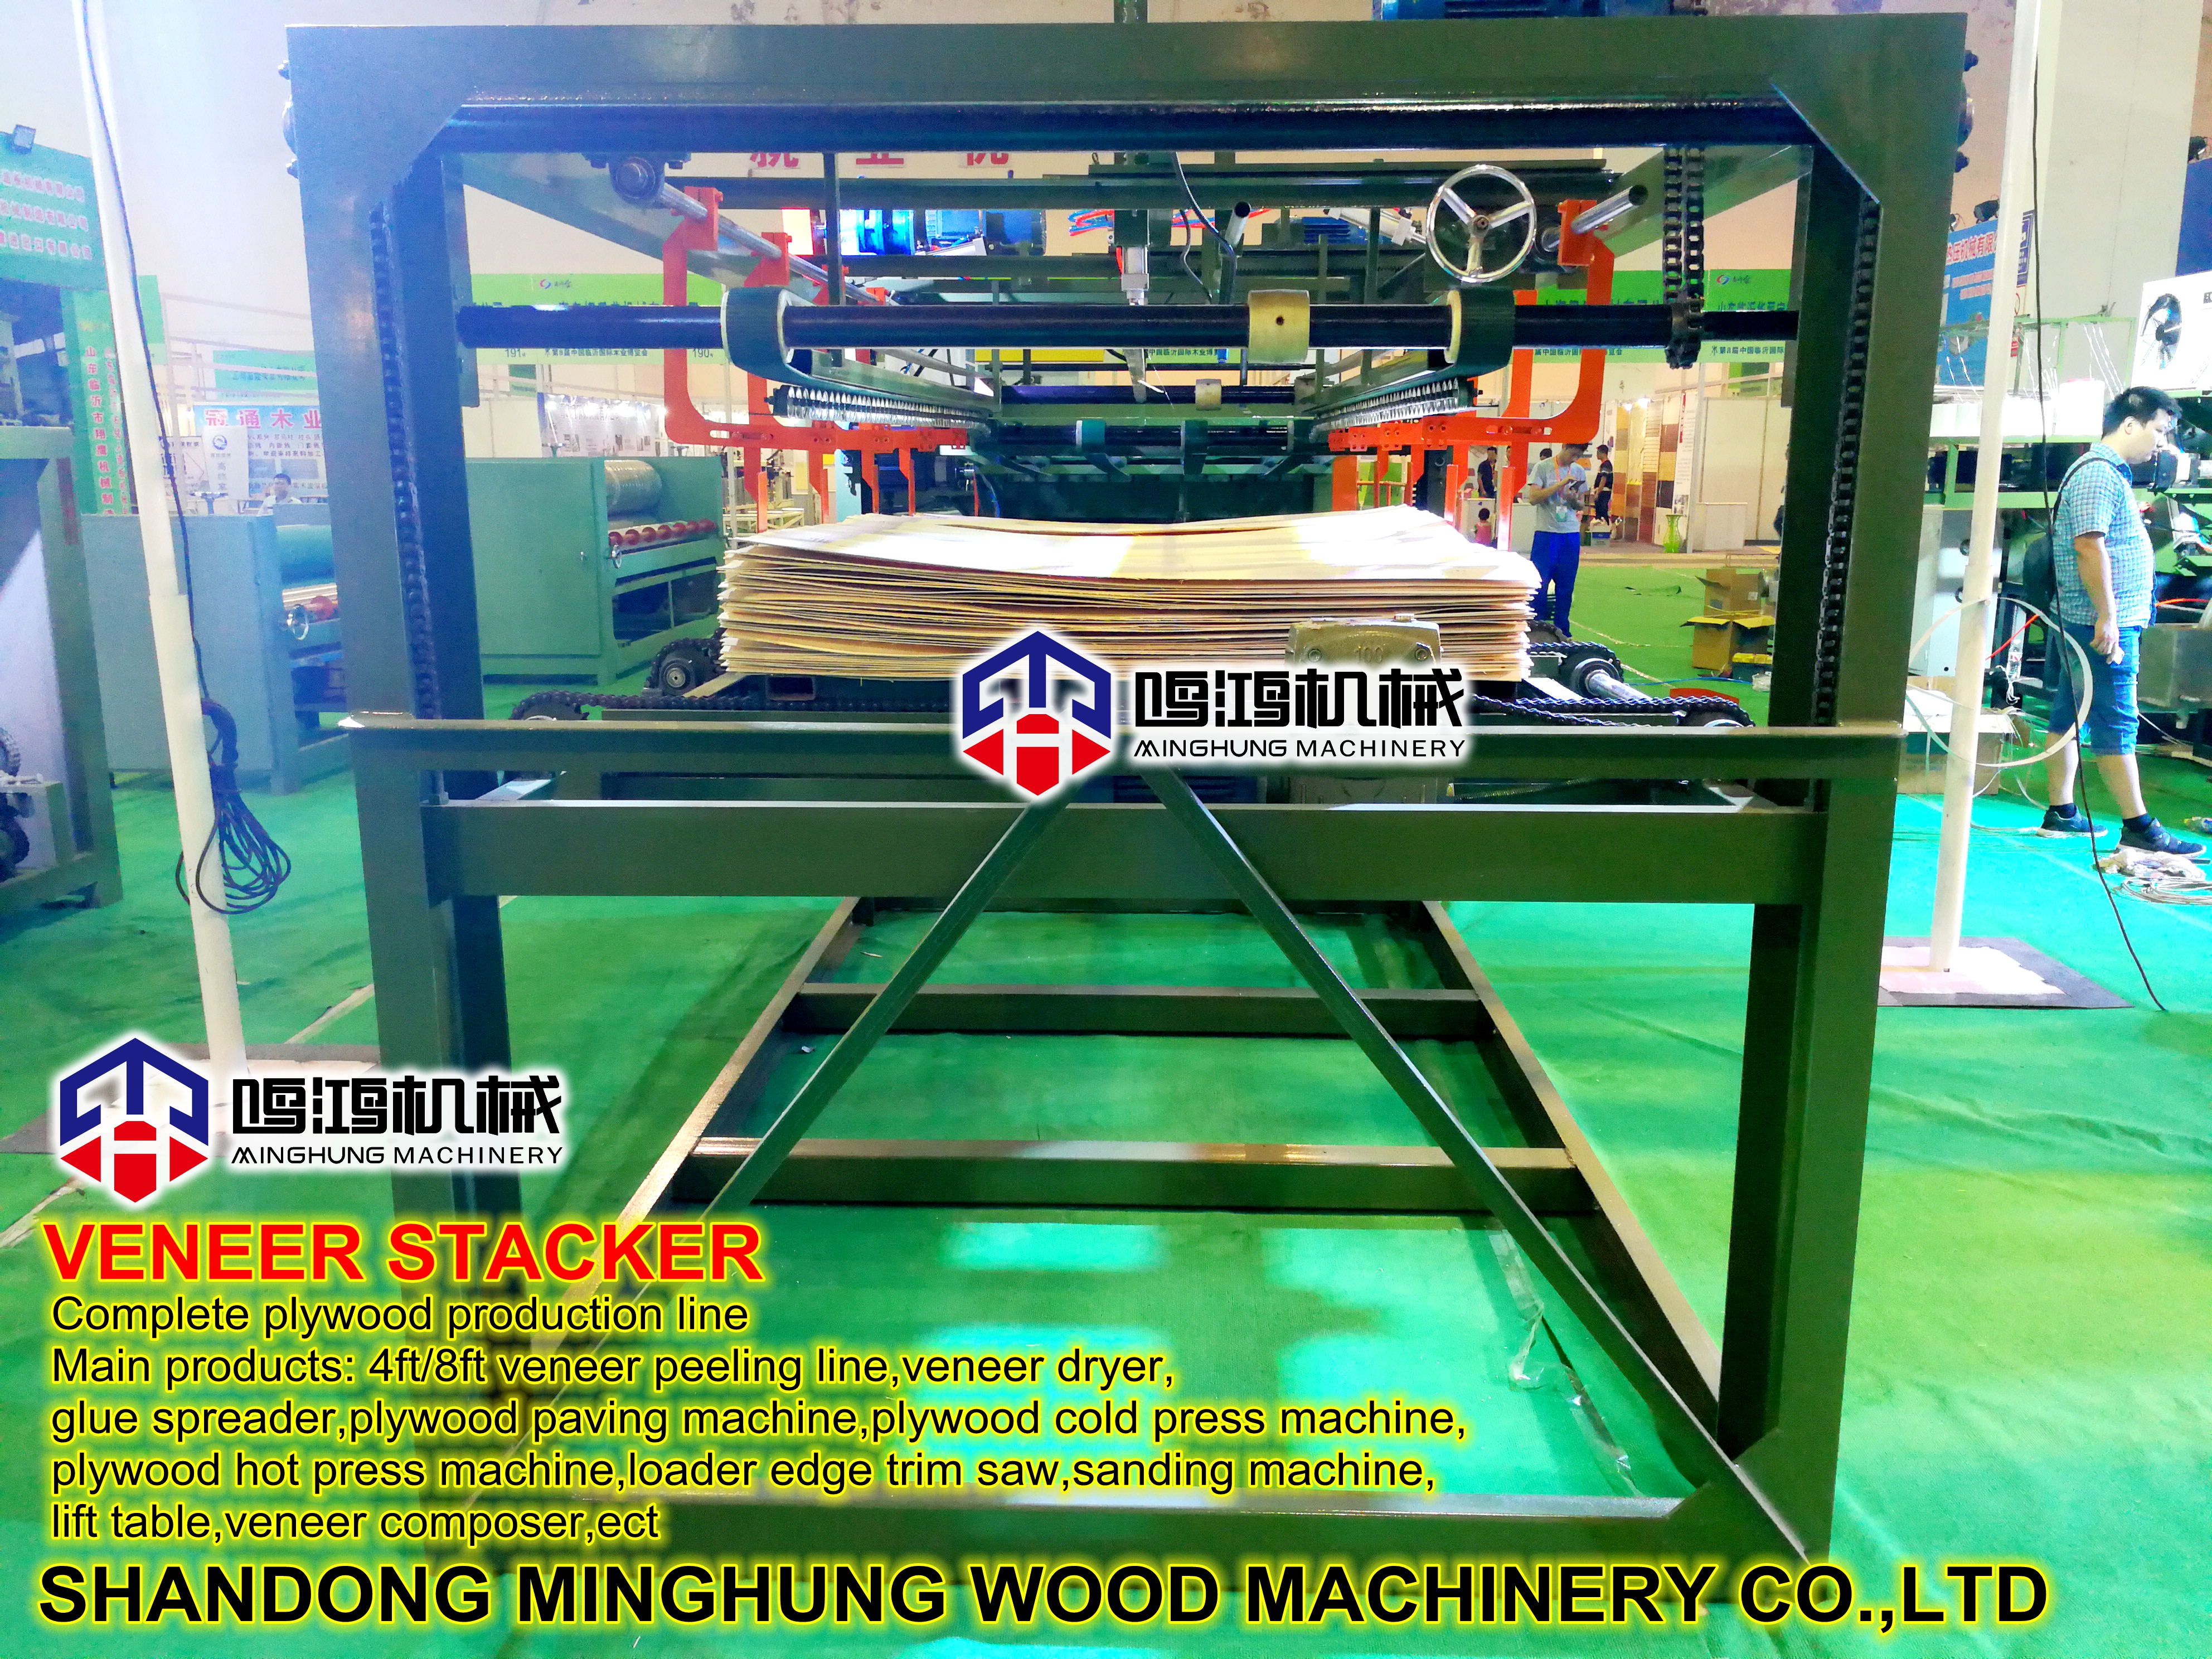 Woodworking Machinery Core Composer for Plywood Veneer